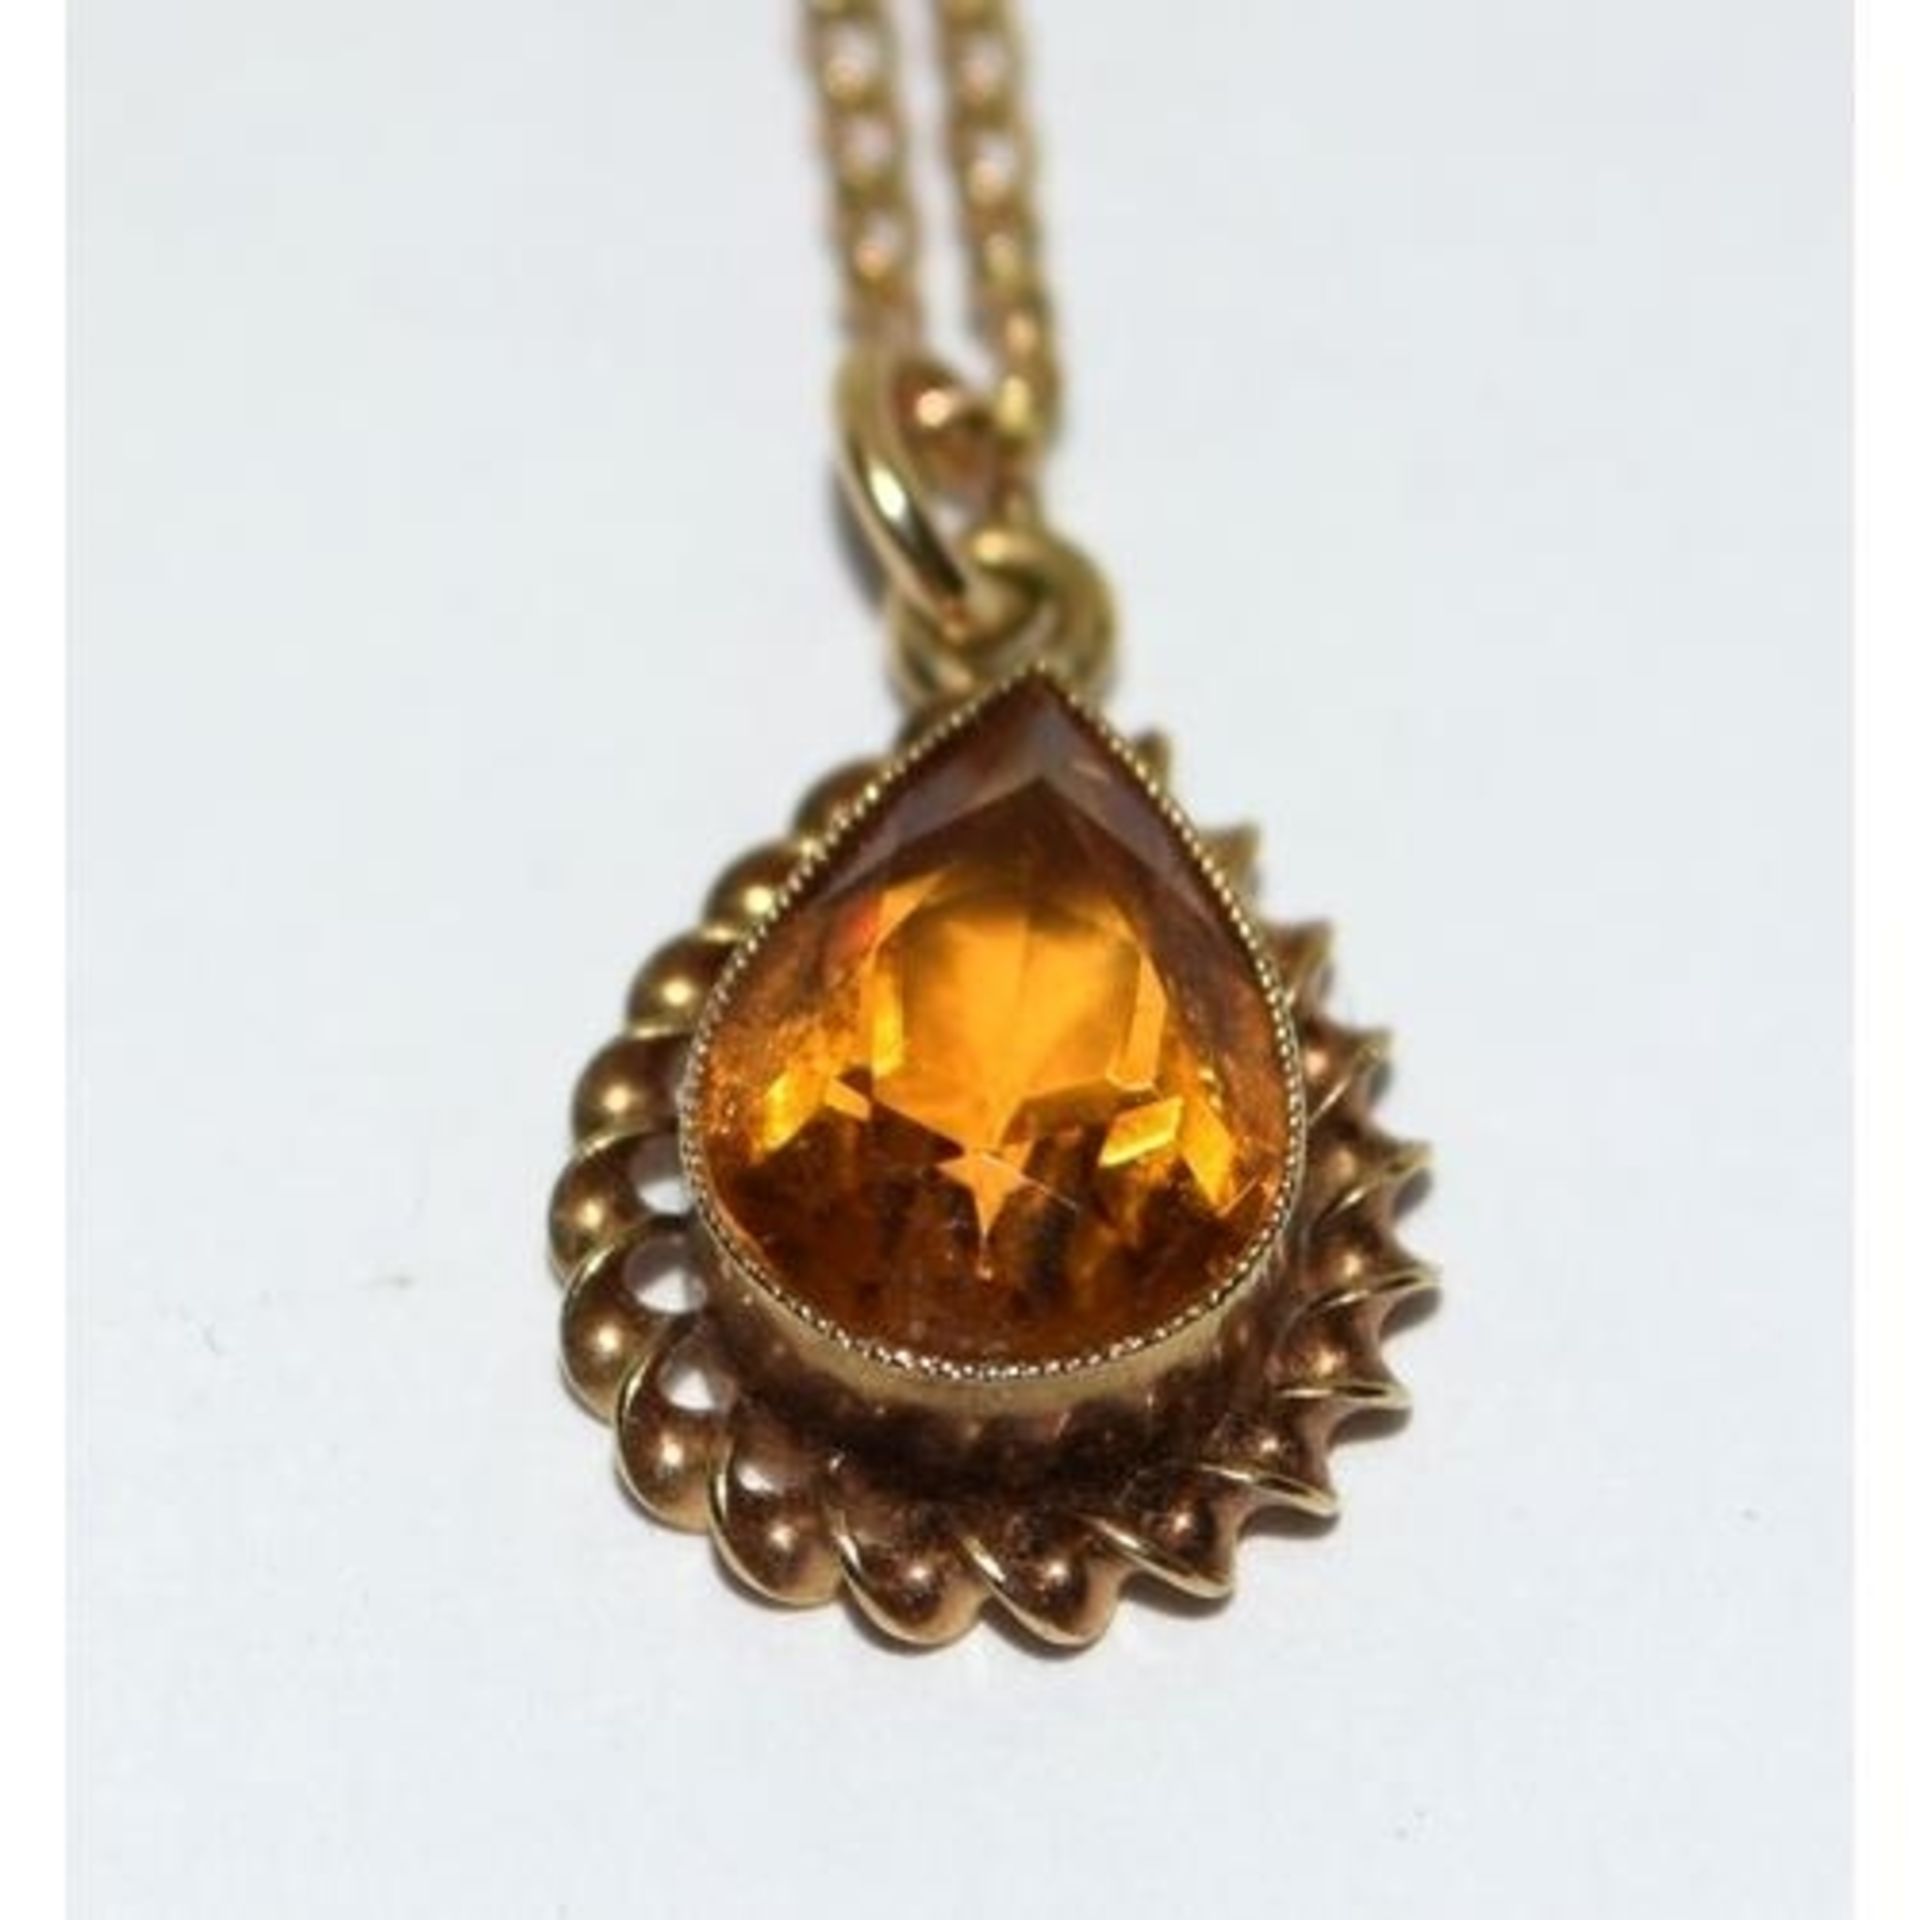 9ct gold Amber pendant necklace chain 42cm long 3g - Image 2 of 5